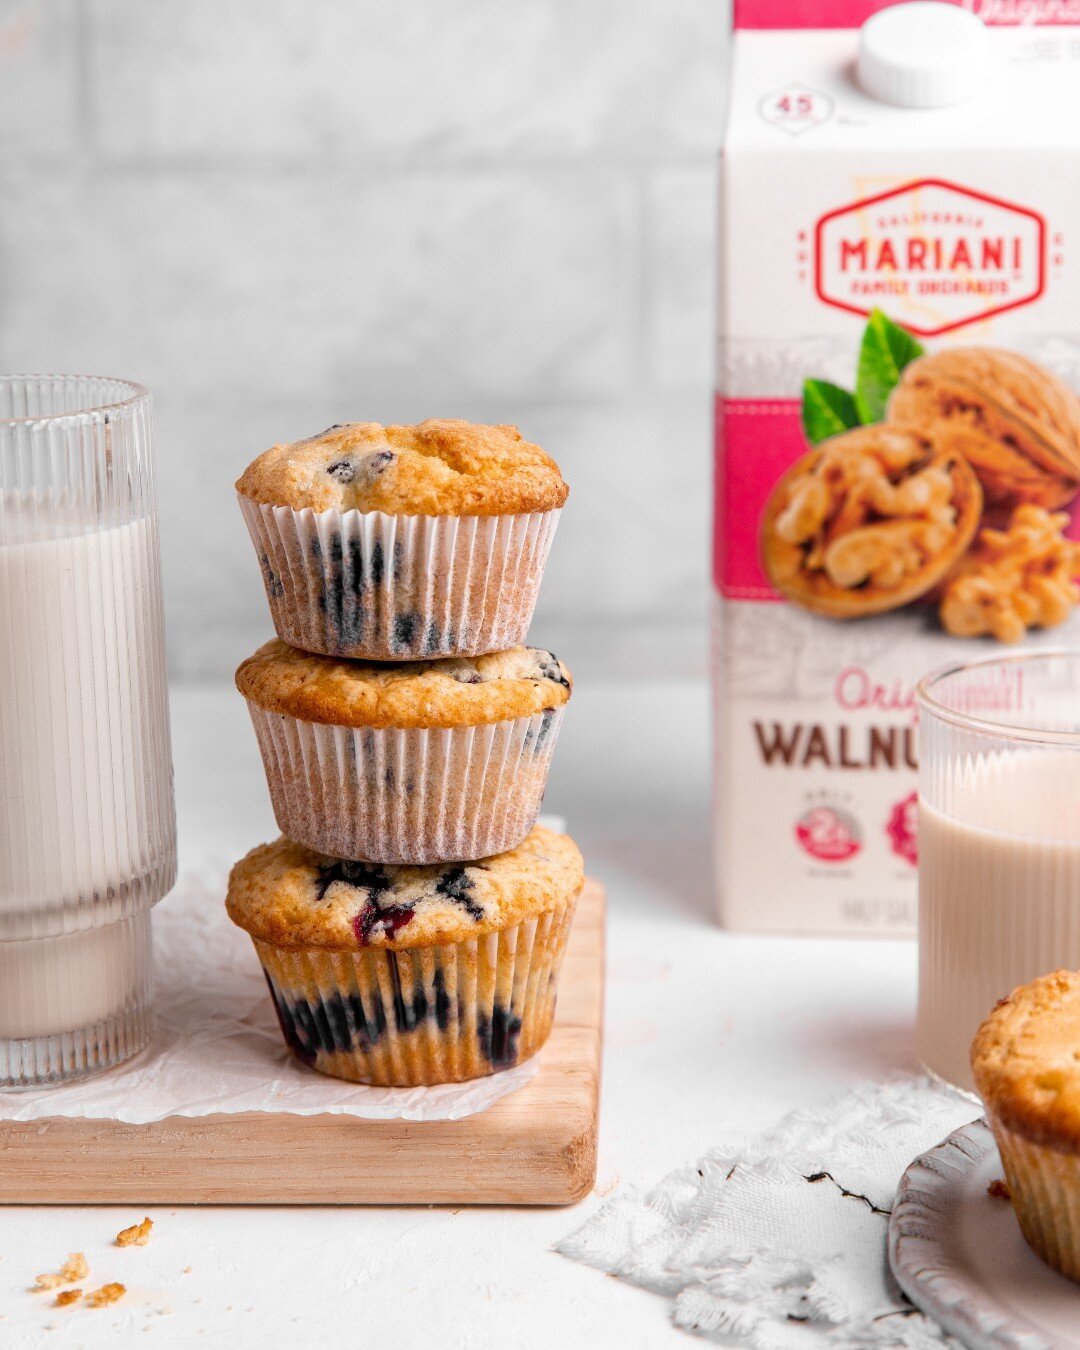 Back to school makes for busy mornings, so why not make blueberry muffins with Mariani Walnutmilk to start your day off with an easy, on-the-go breakfast!